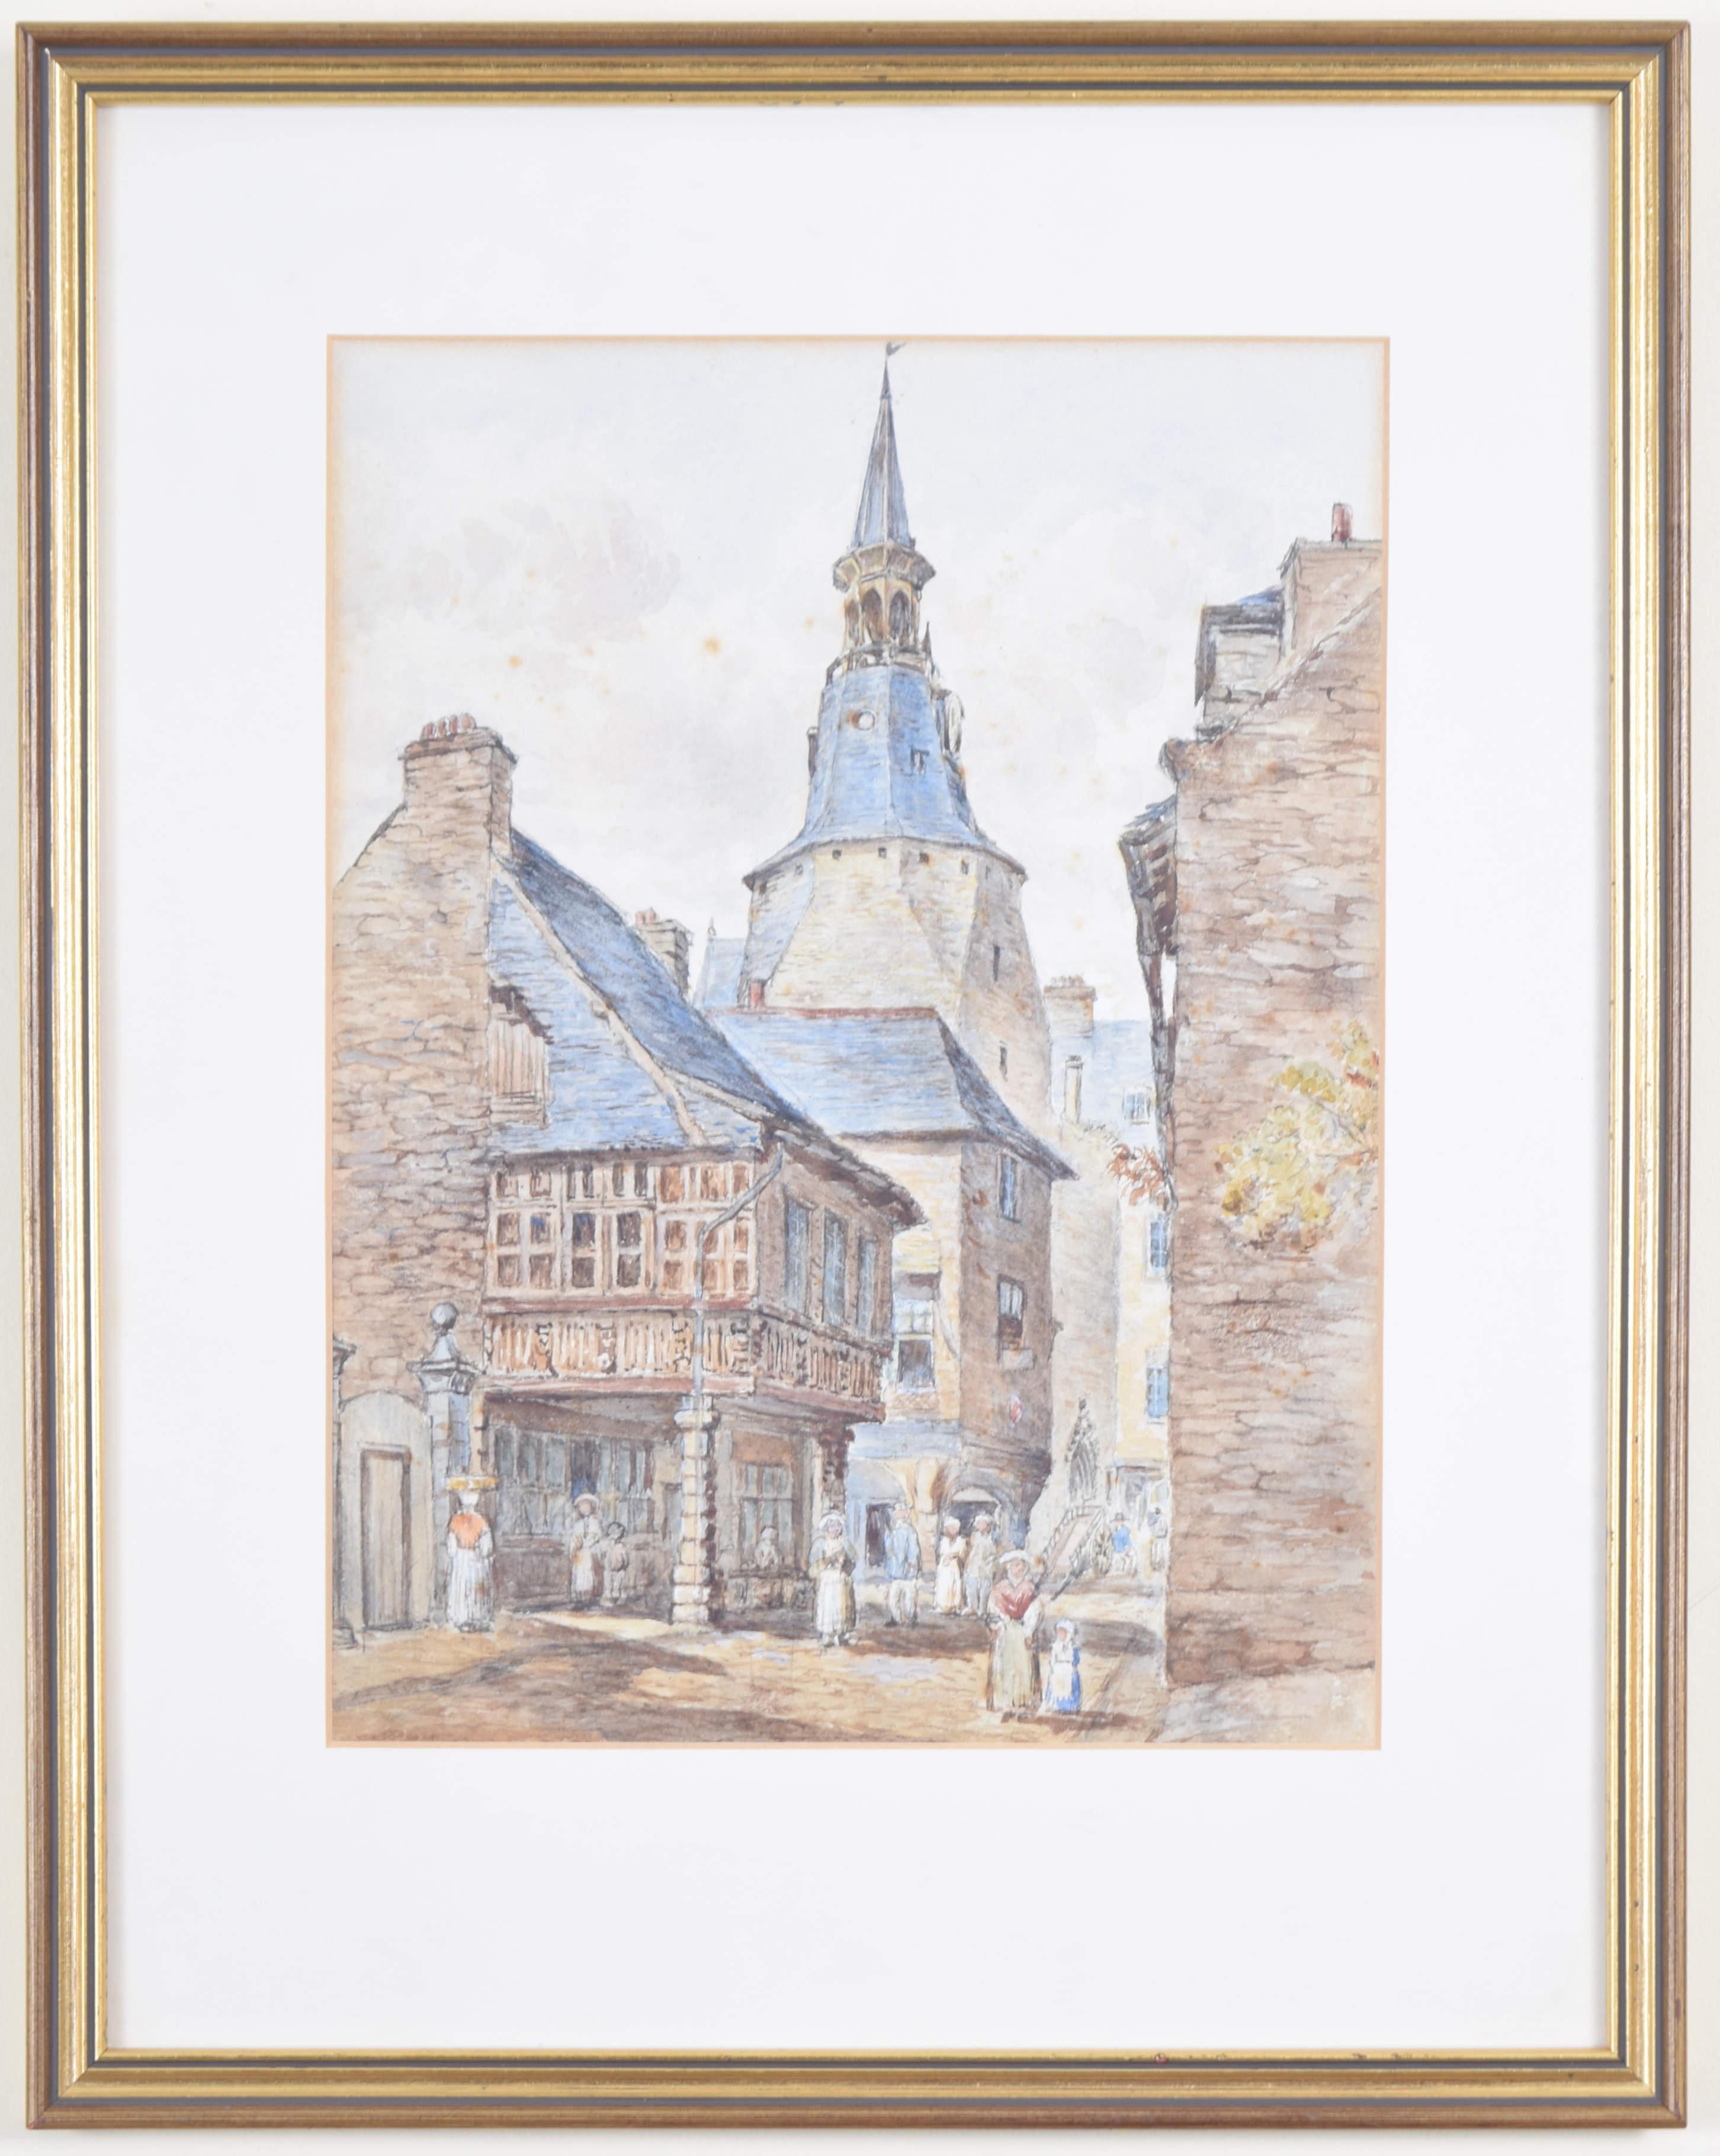 Attributed to Antony Vandyke Copley Fielding (1787 - 1855)
Dinan Tour de l’Horloge (Dinan Clock Tower)
Watercolour
28 x 21 cm

A spirited watercolour of Dinan, Brittany. Dinan's famous clock tower looks over a French street scene: men, women, and